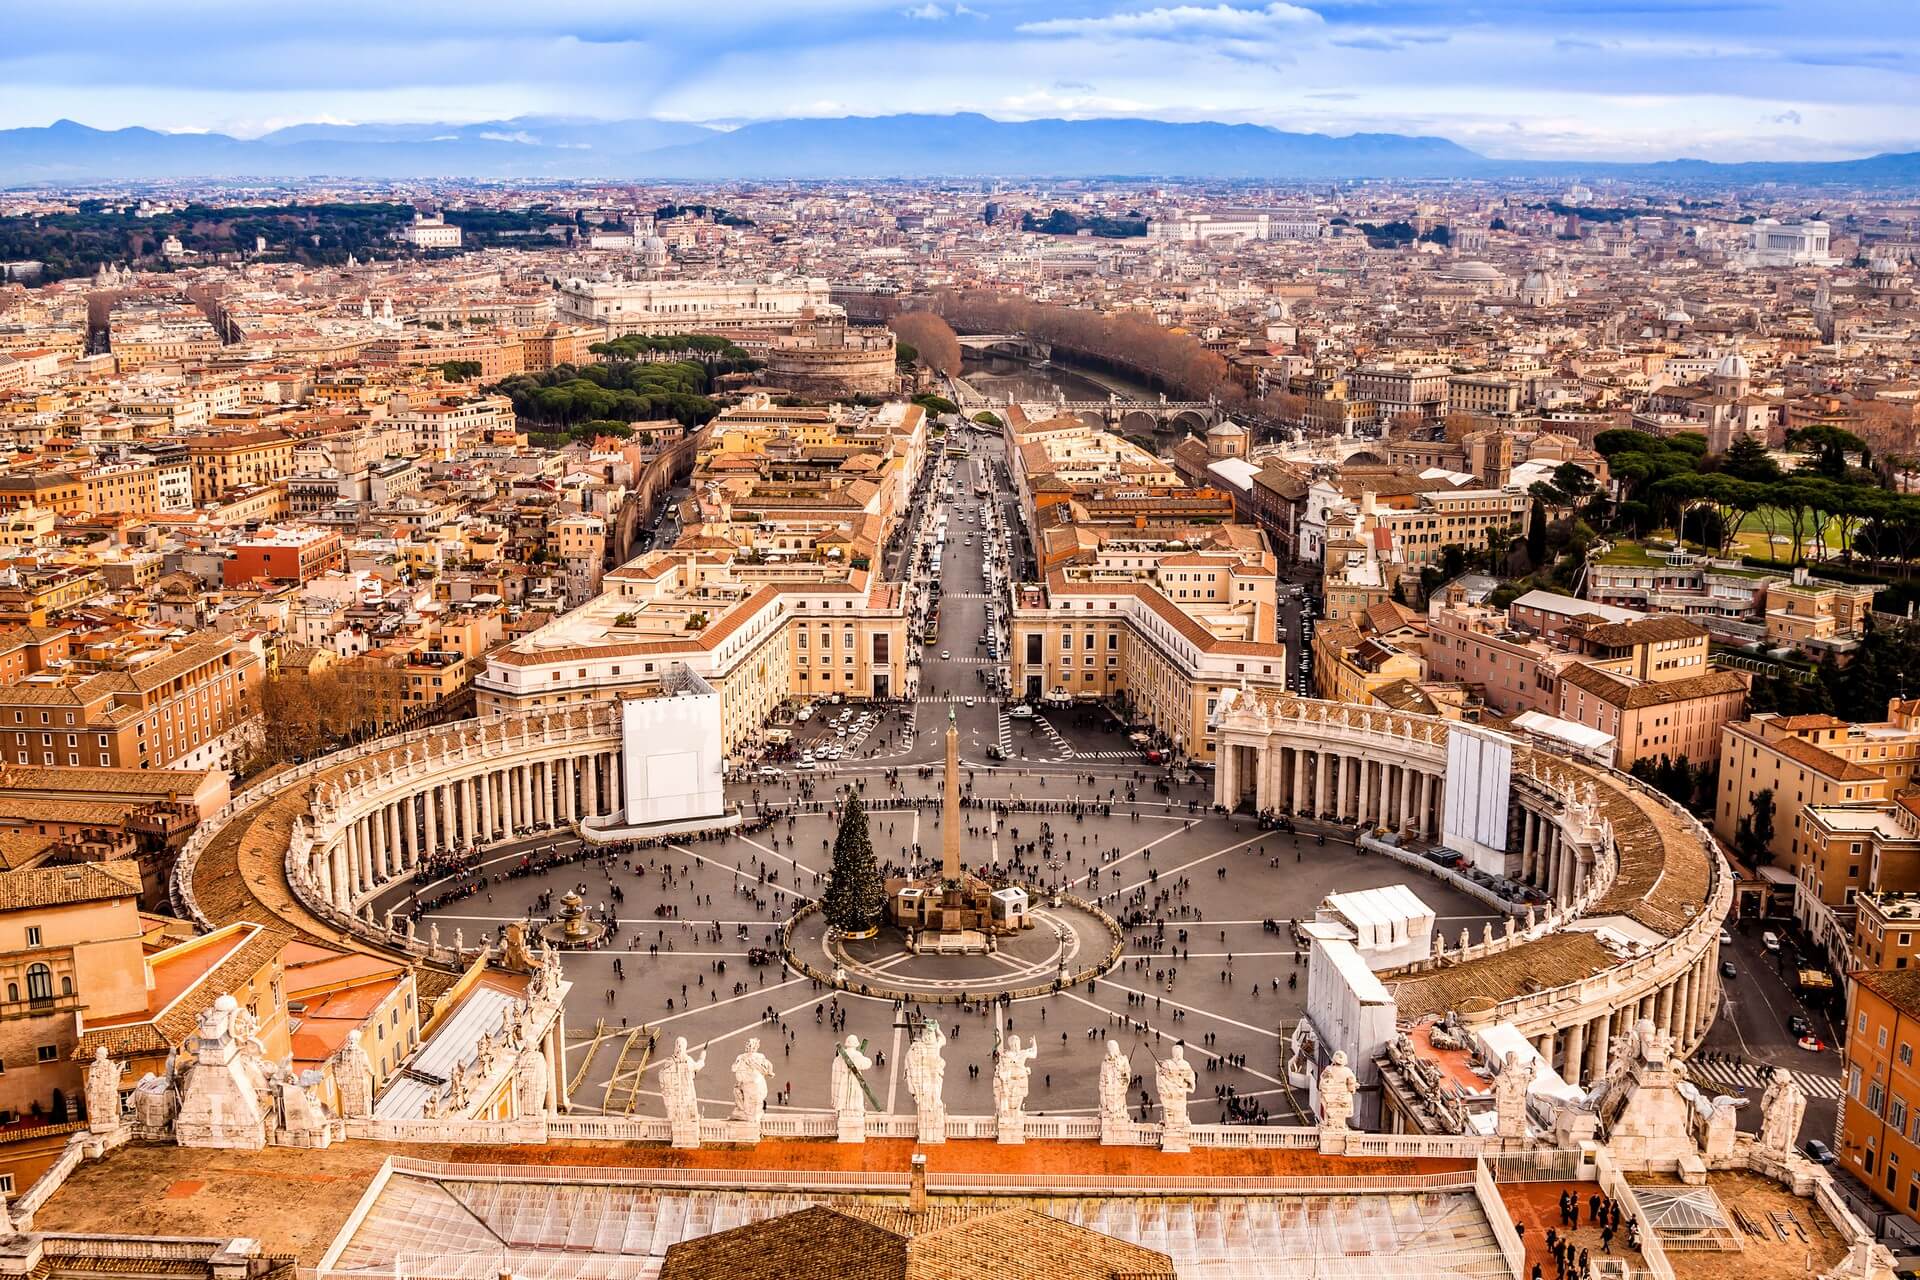 Rome, Italy. Famous Saint Peter's Square in Vatican and aerial view of the city.
